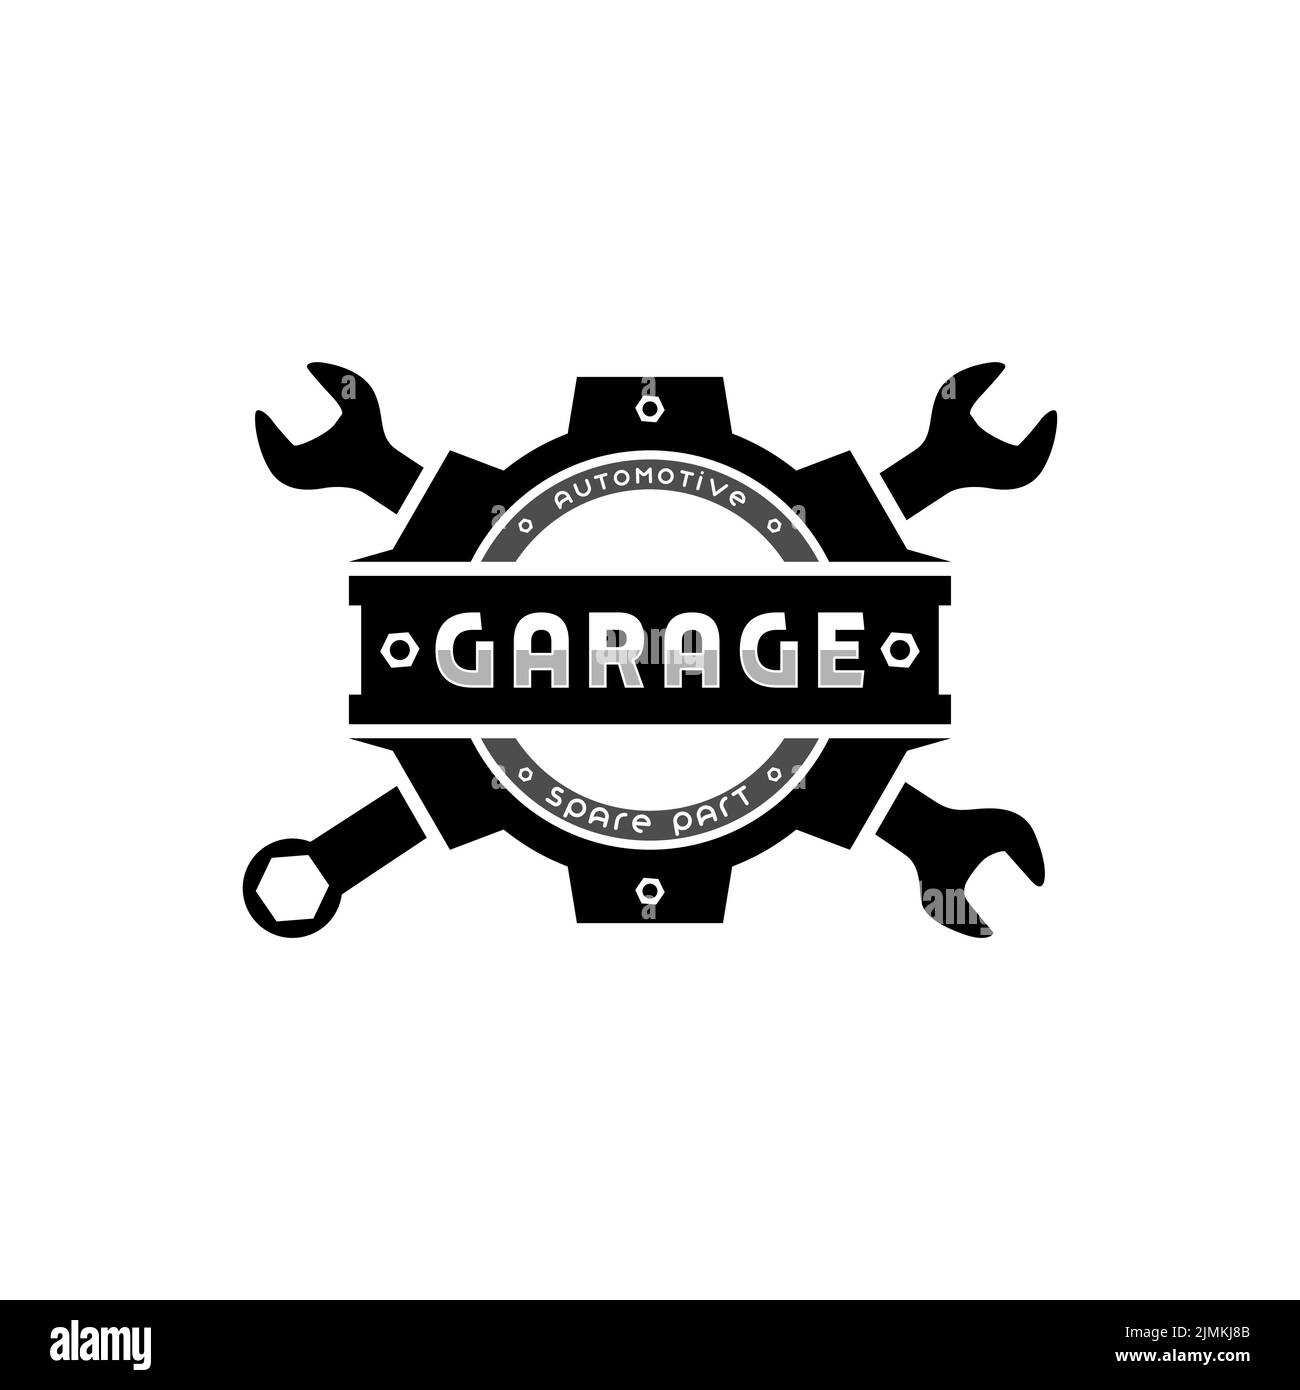 Gear And Wrench For Workshop Garage Logo Design Inspiration Stock Vector